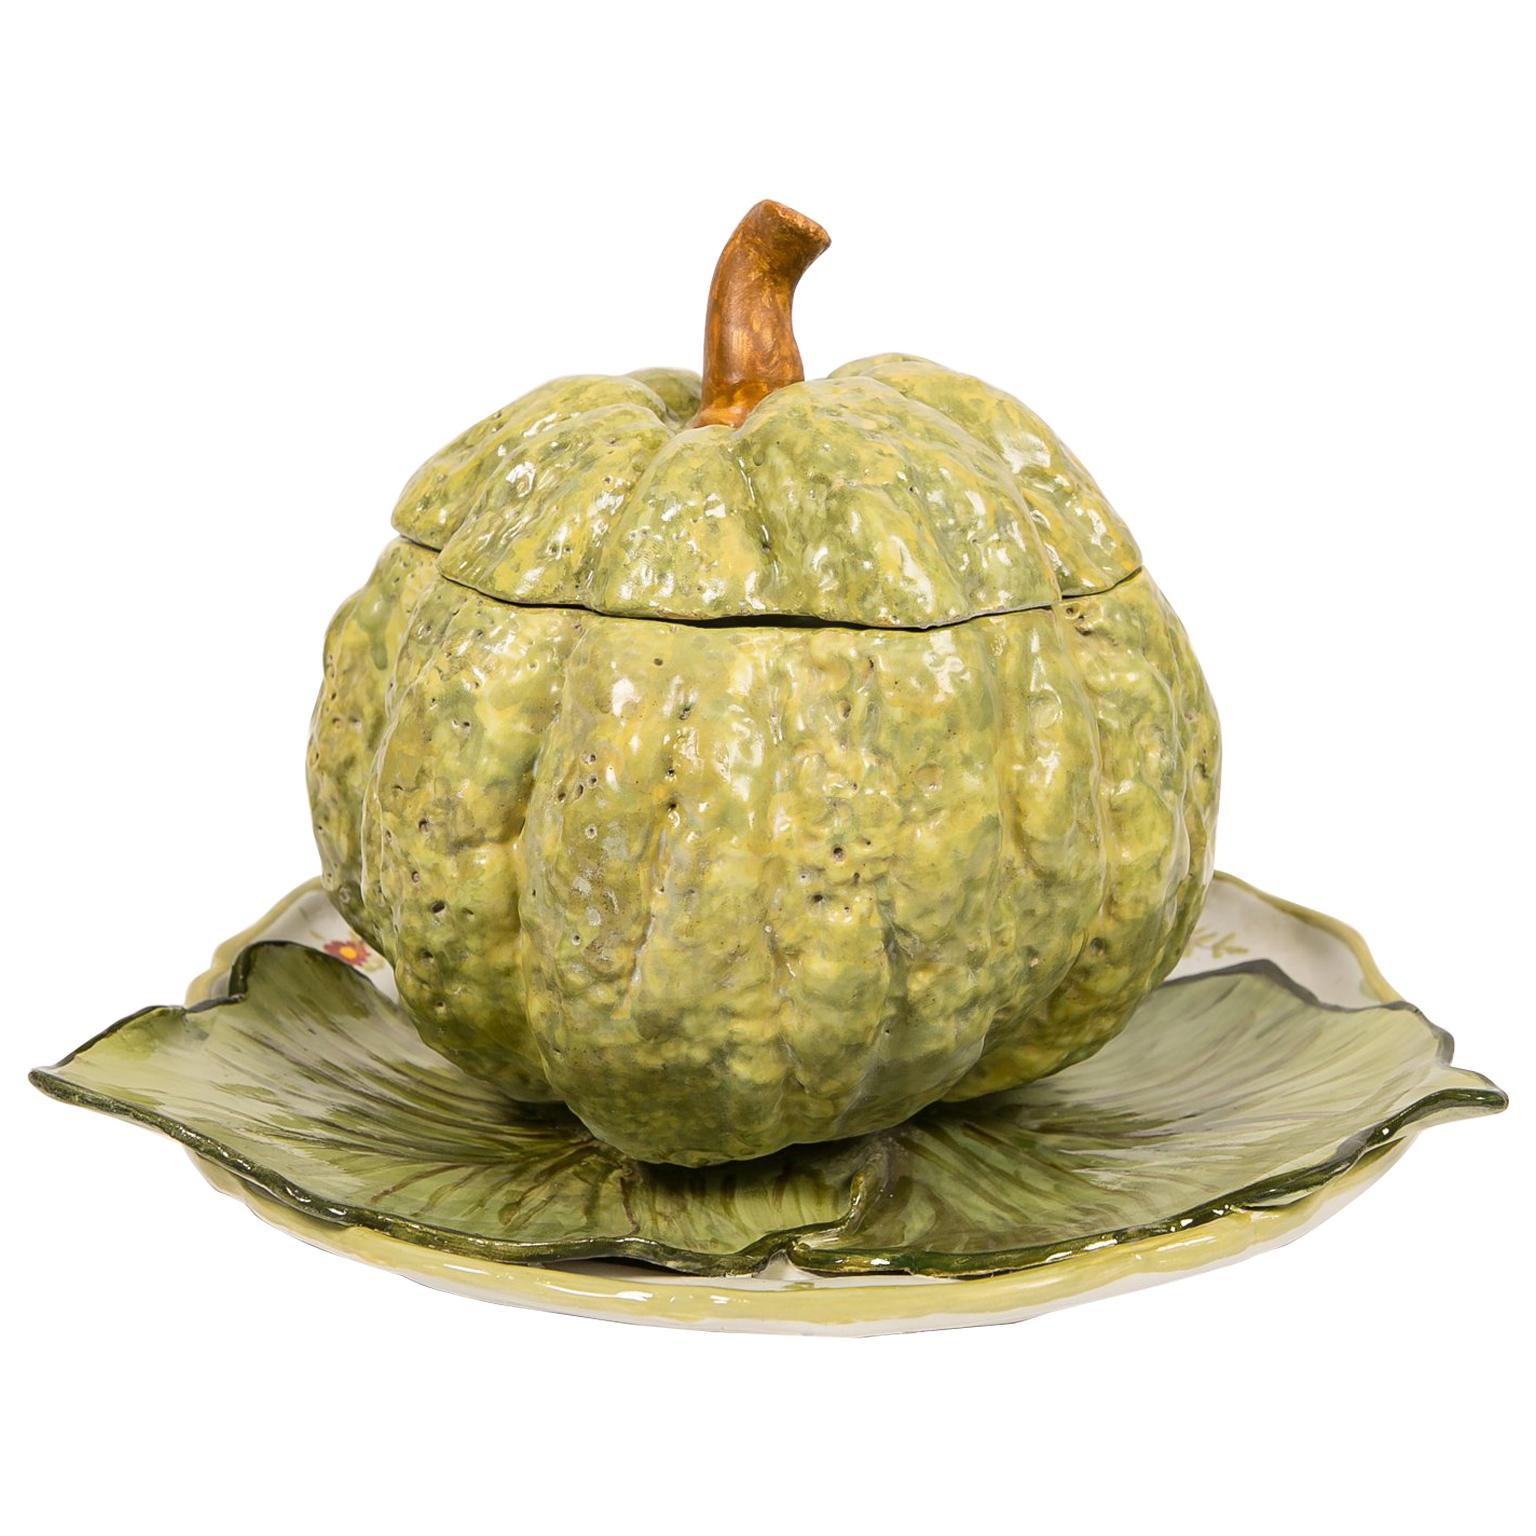 Antique French Faience Tureen Modeled as a Pumpkin 18th Century